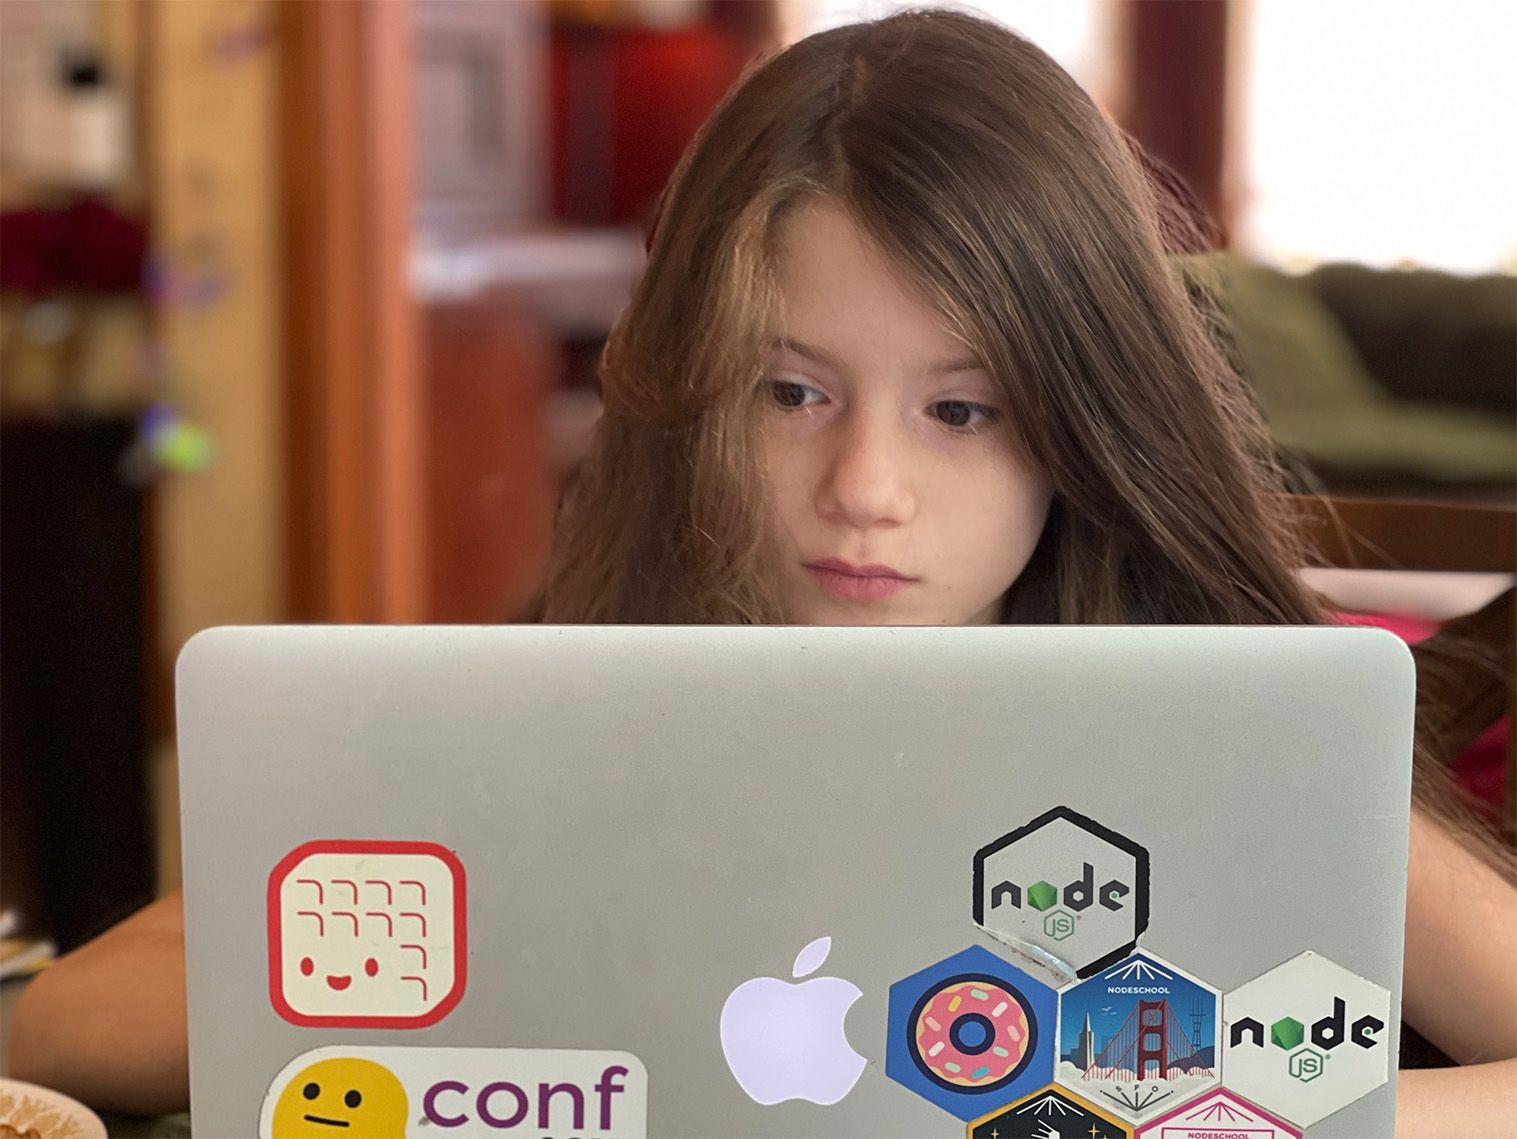 A young girl is working intently at her laptop, which is decorated with Node.js stickers.